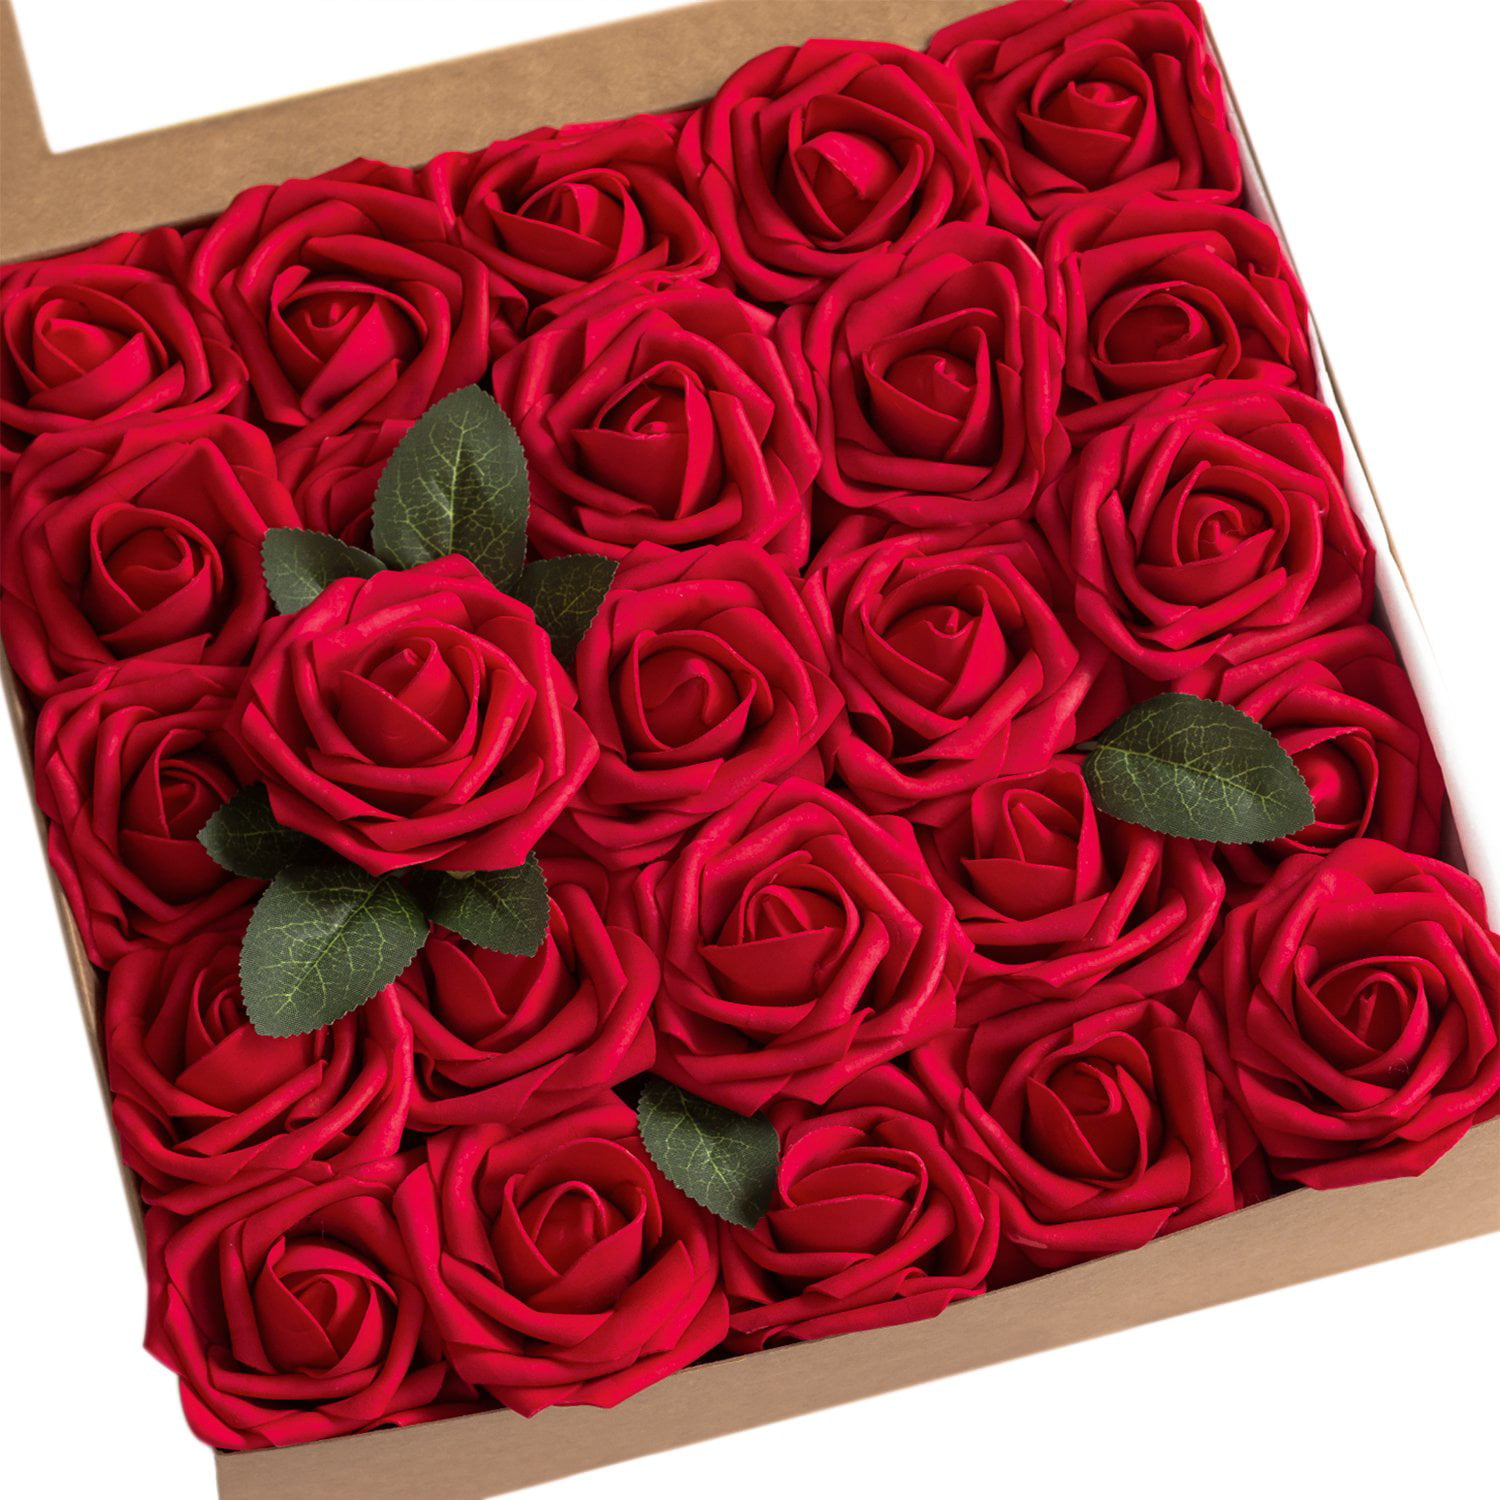 Silk Rose Red Fake Rose Eternal Flowers Single Stem Gift Wrapped Red Rose Flowers for Wedding Bouquets Anniversary Party Hotel Office Decor Artificial Flowers 